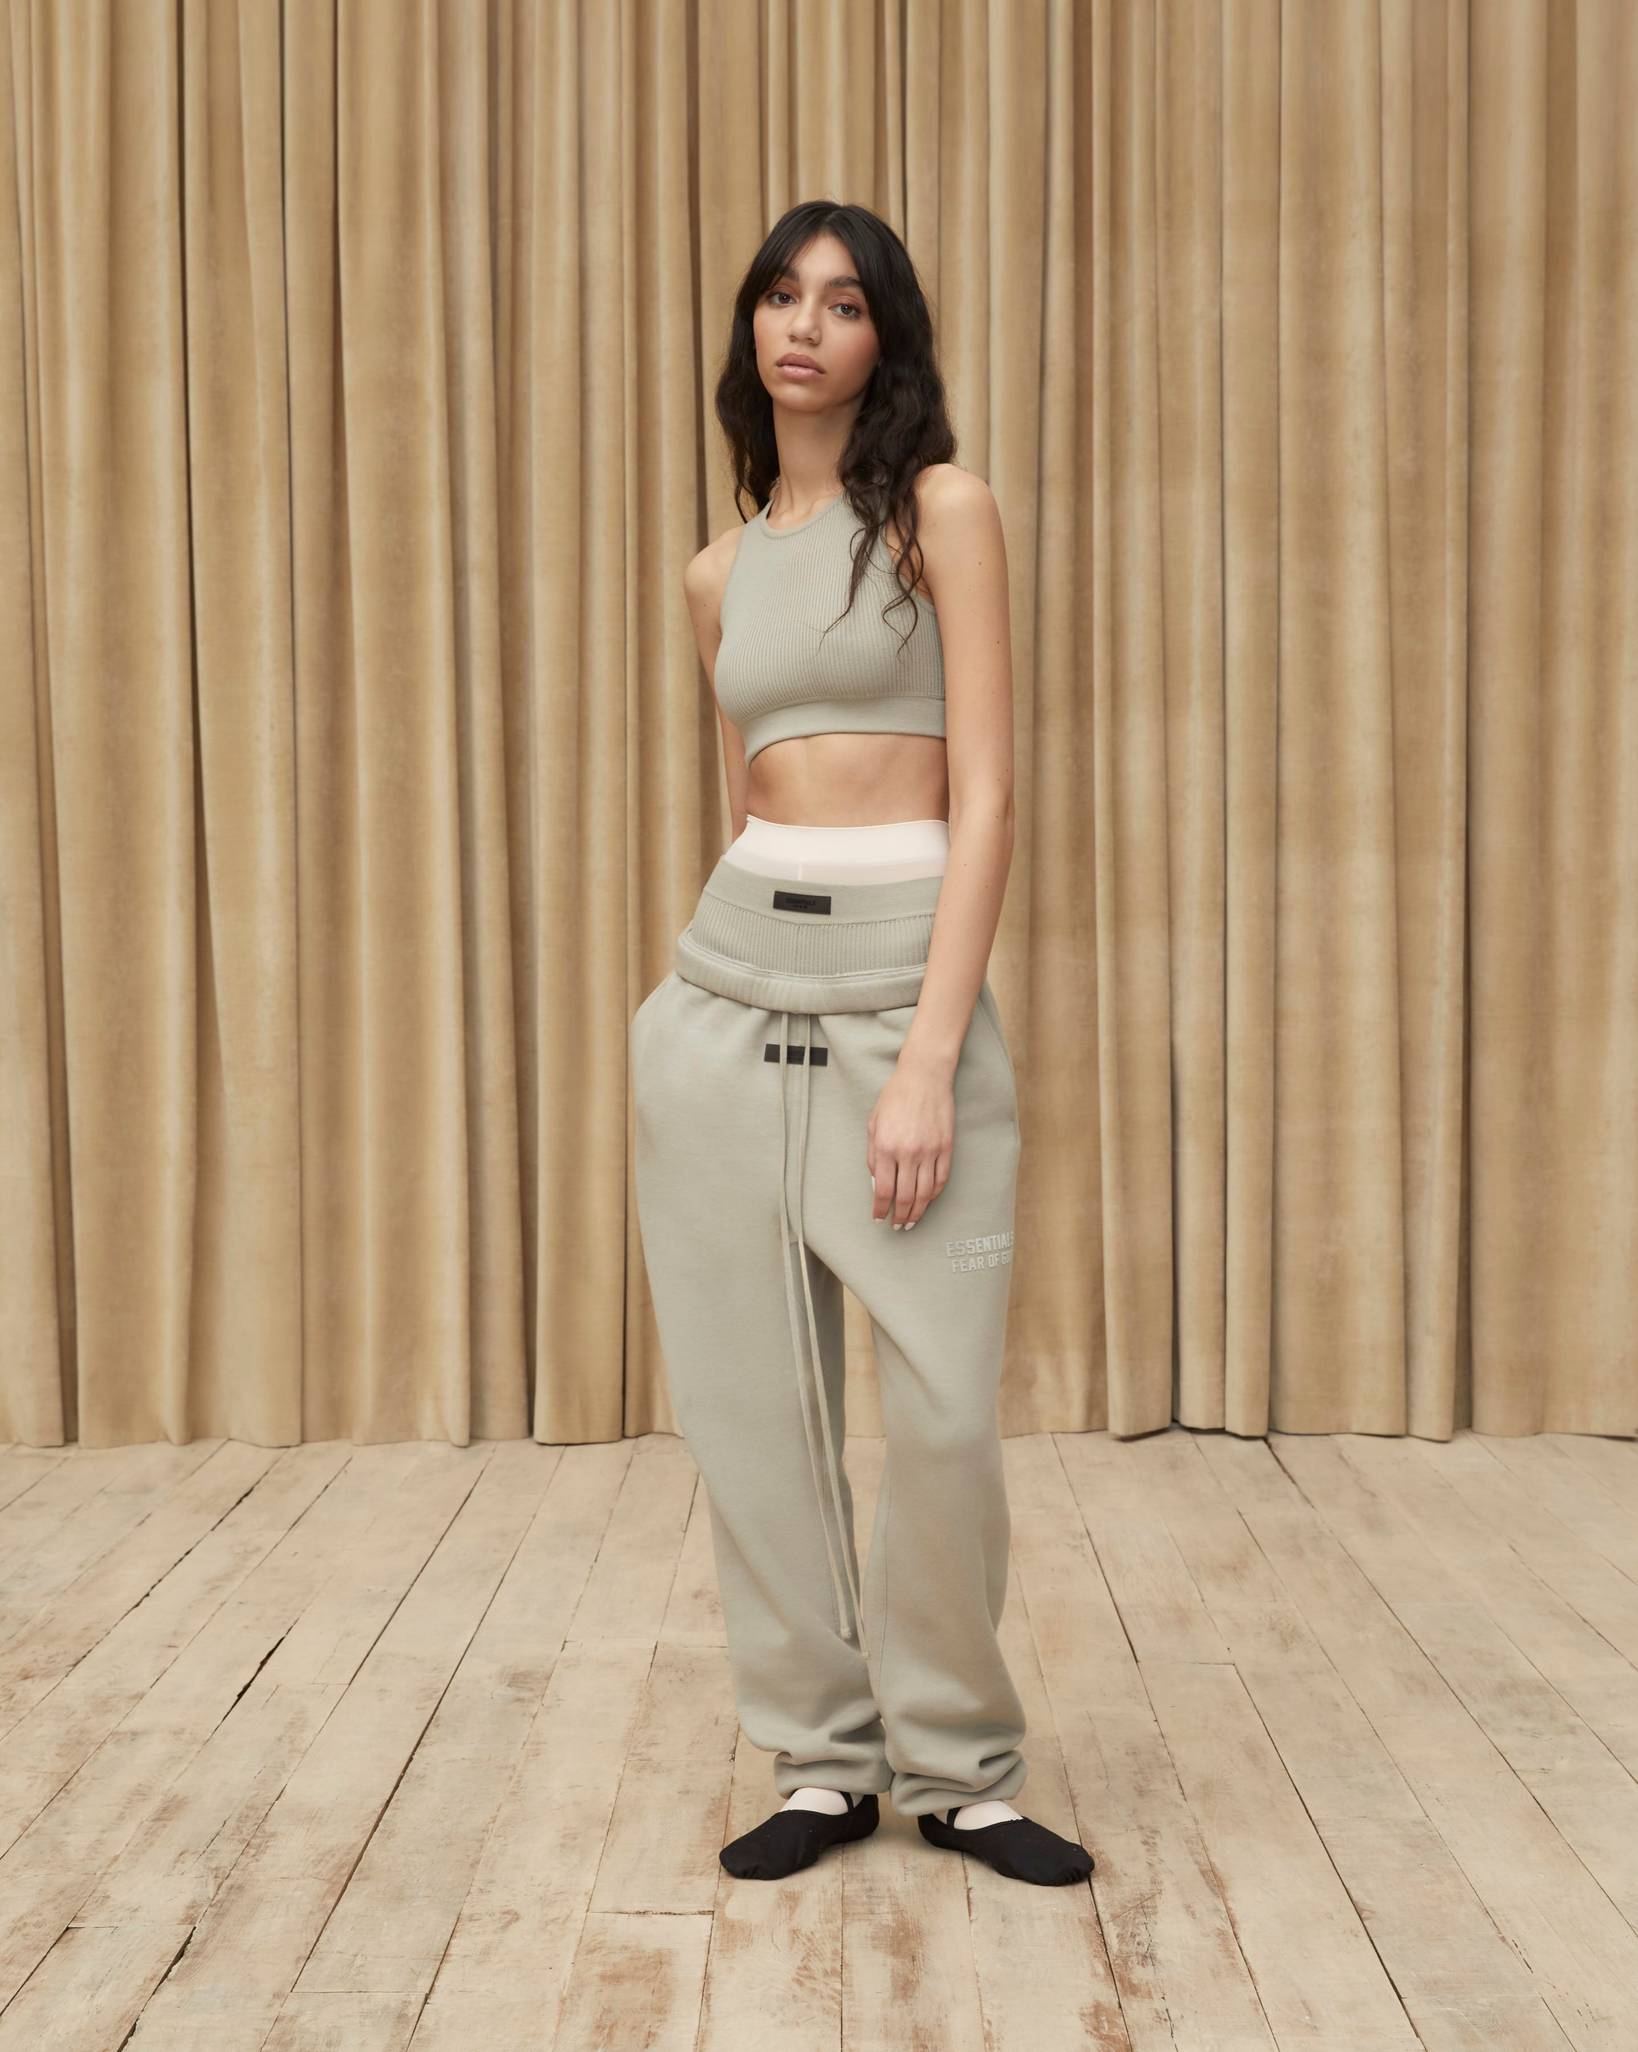 FOG Essentials Leans Into Ballet Core For Spring '23 Styling